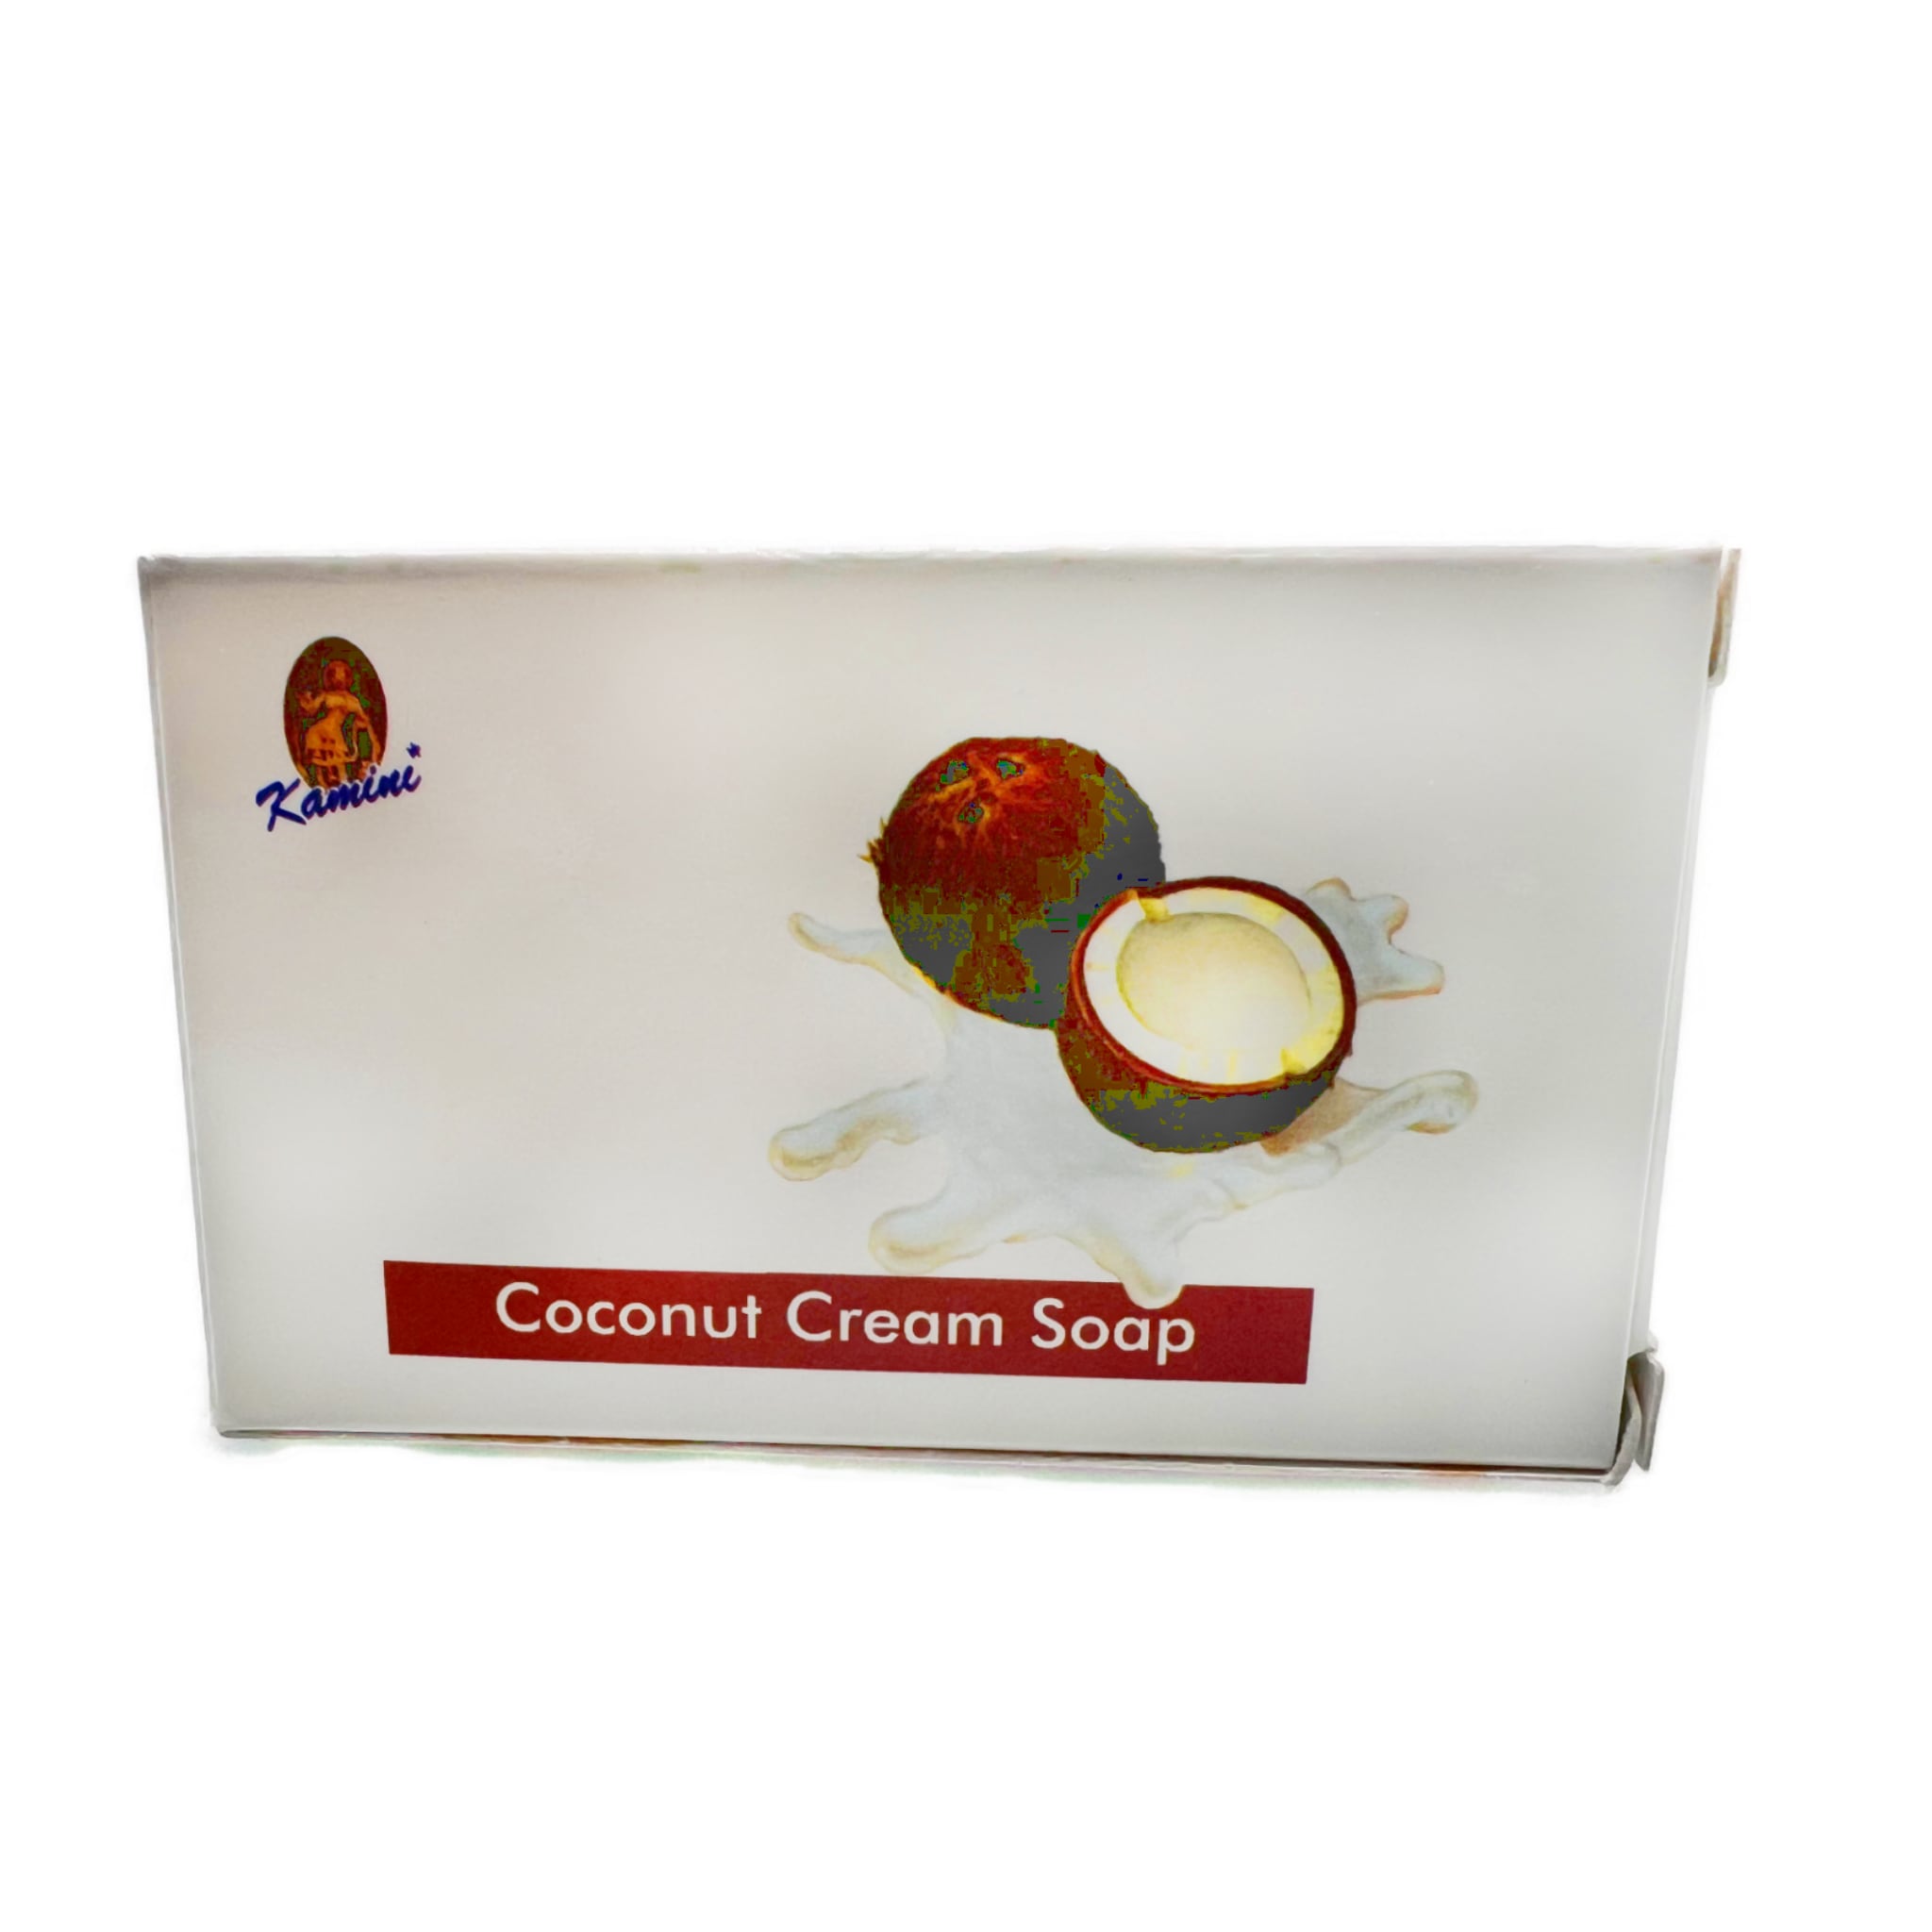 White box with image of split coconut